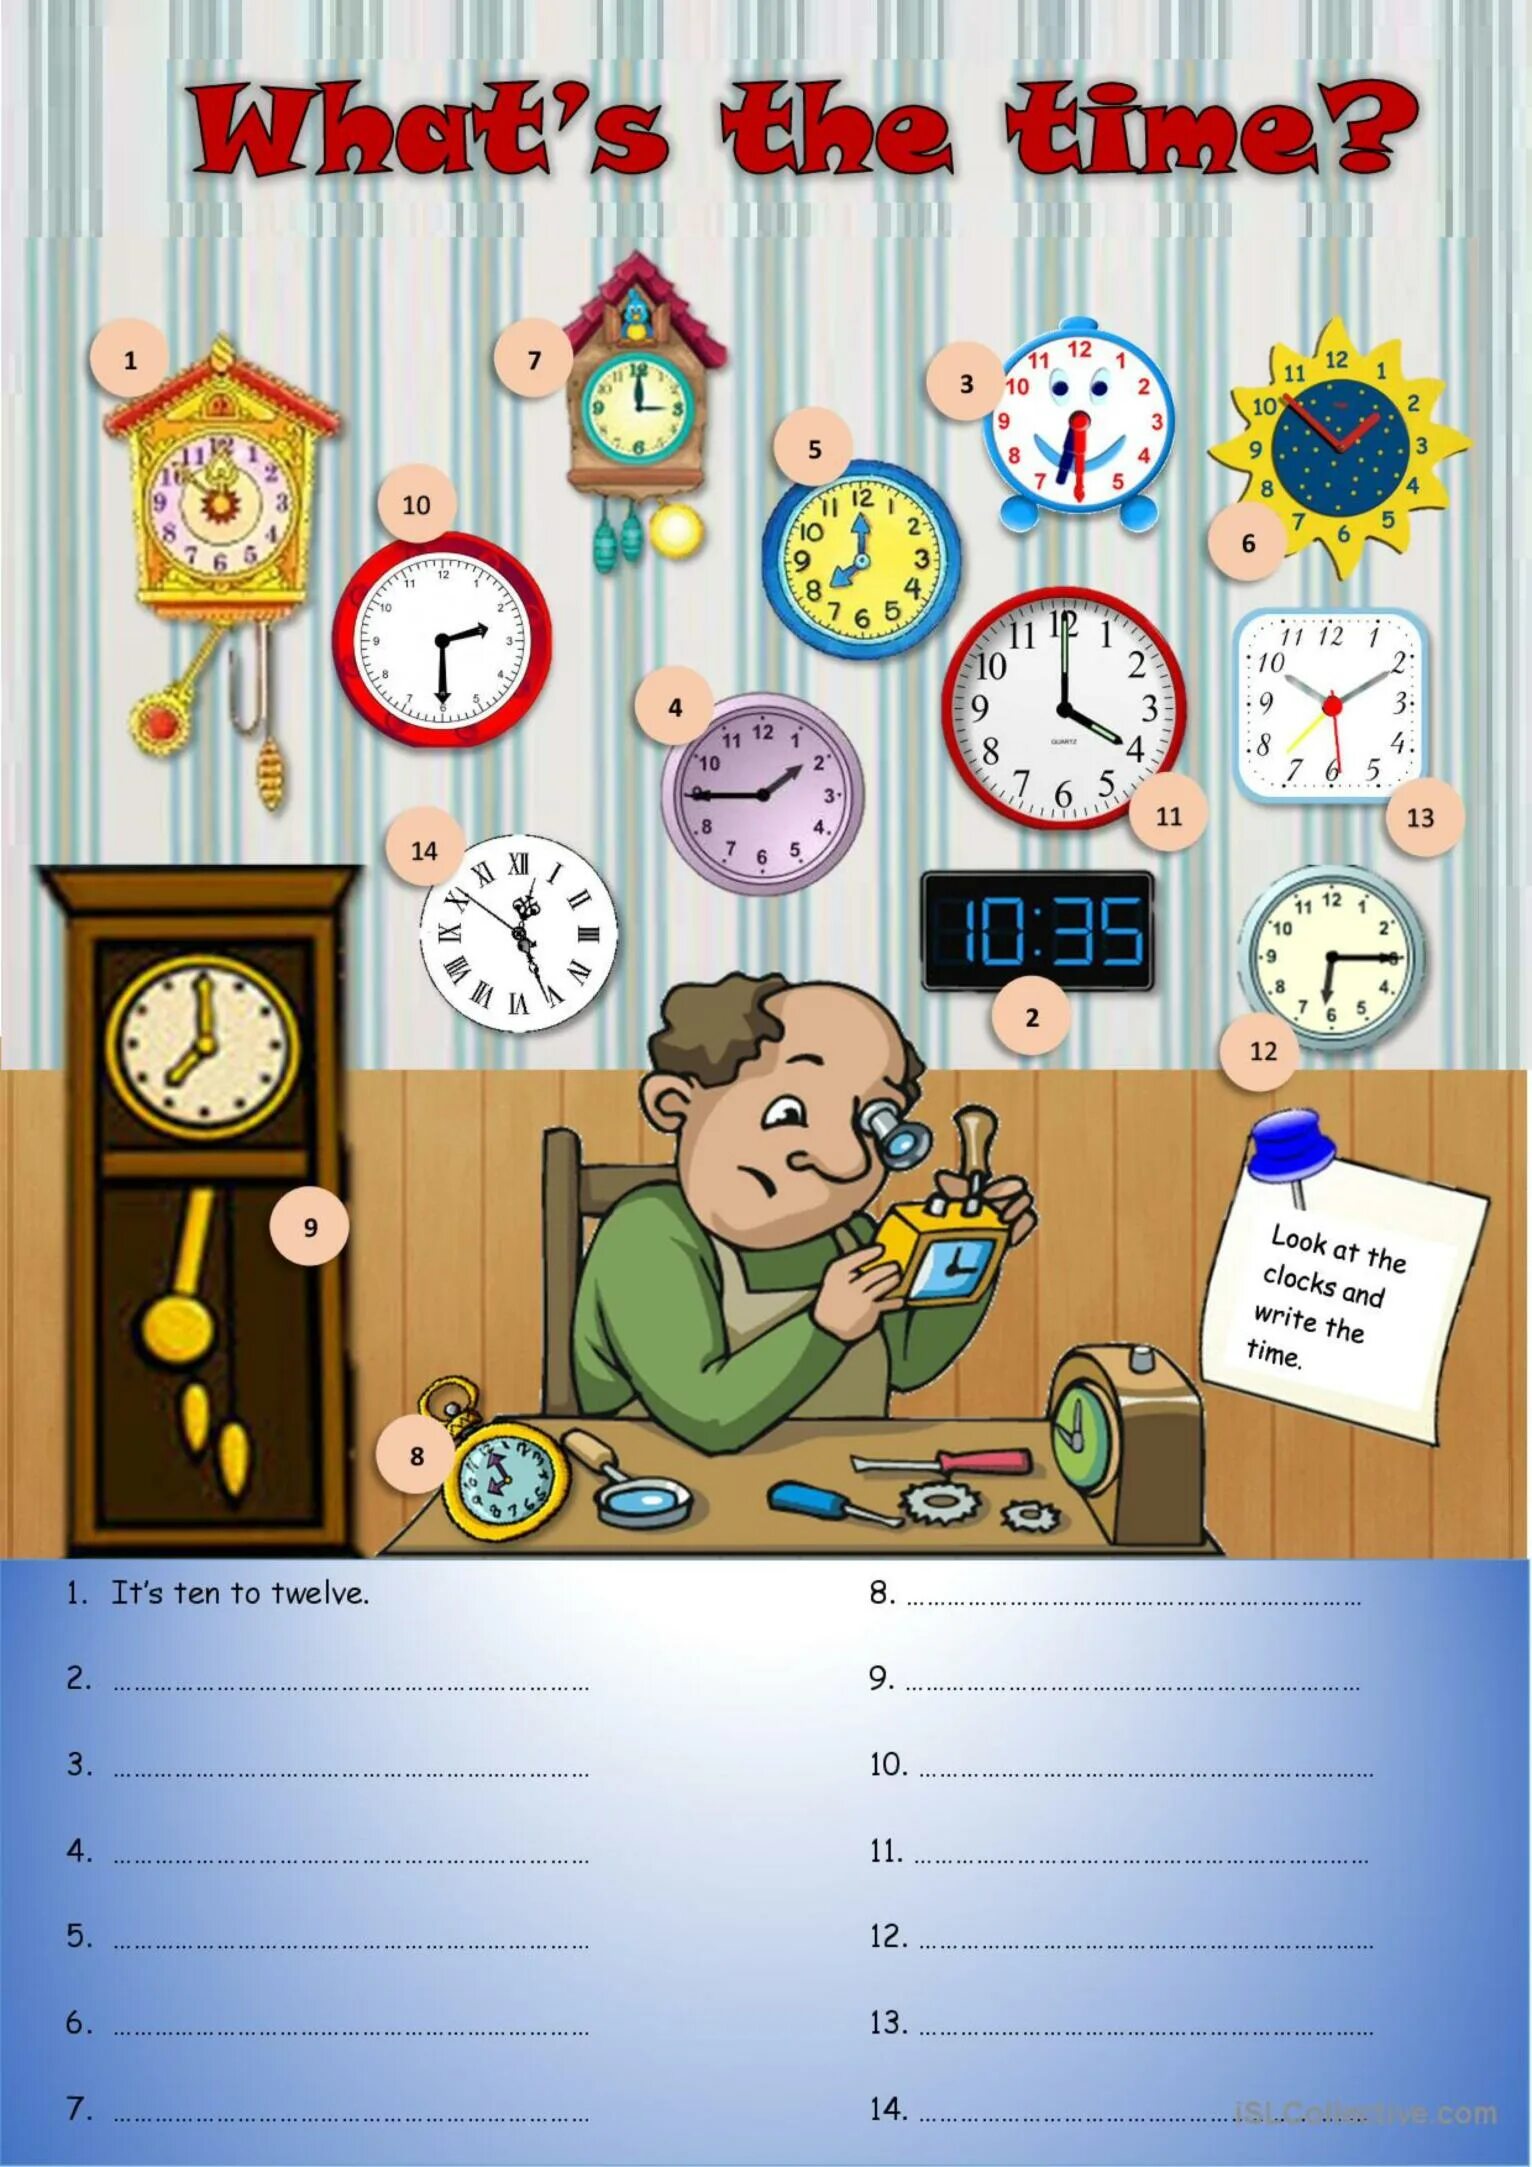 What the time he asked. Время на английском Worksheets. What`s the time. Часы в английском языке Worksheet. What time is it задания.